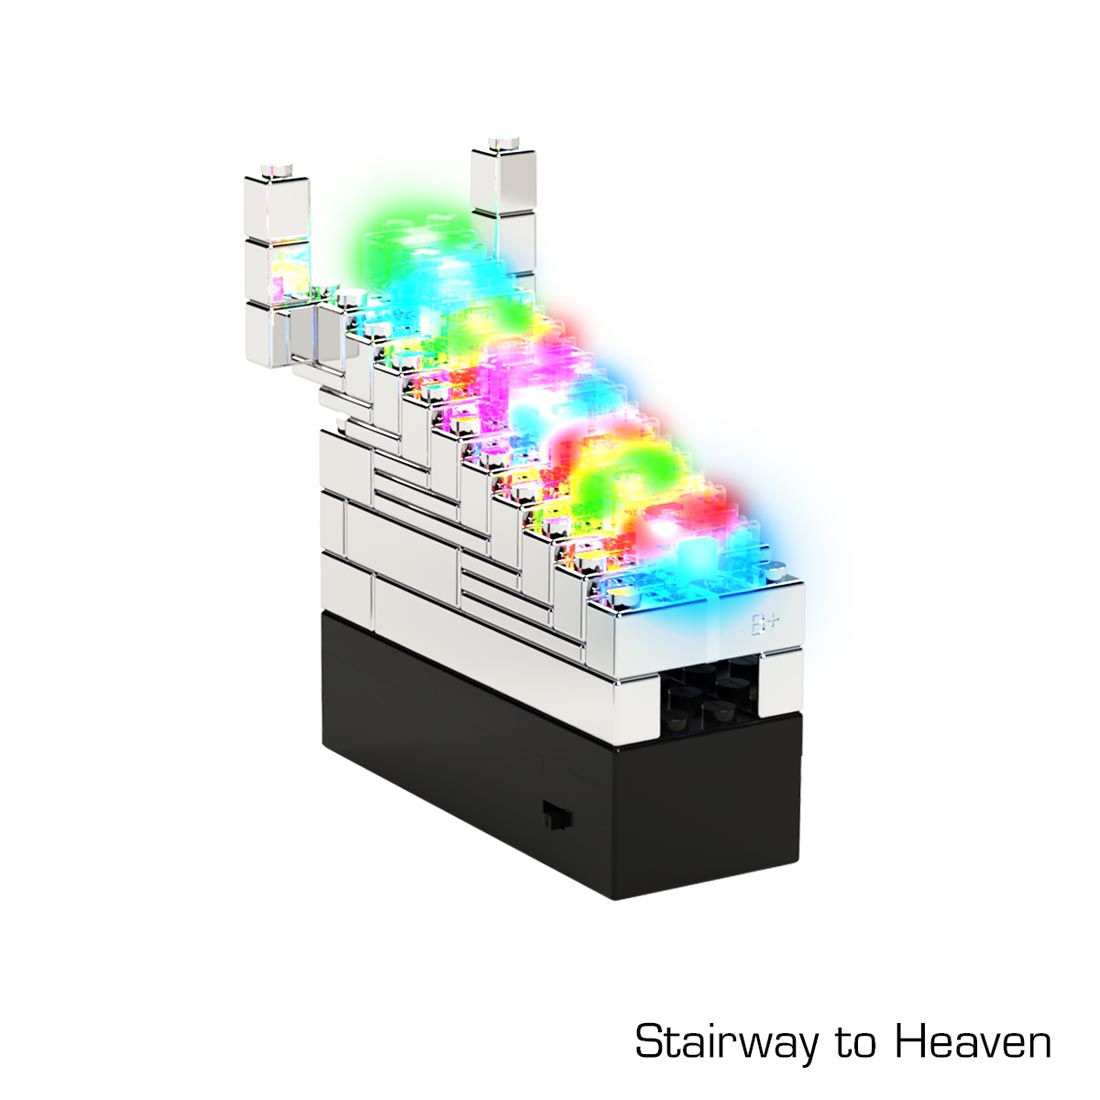 Stairway to Heaven built from the E-Blox Power Blox Essentials 140 Classroom Set